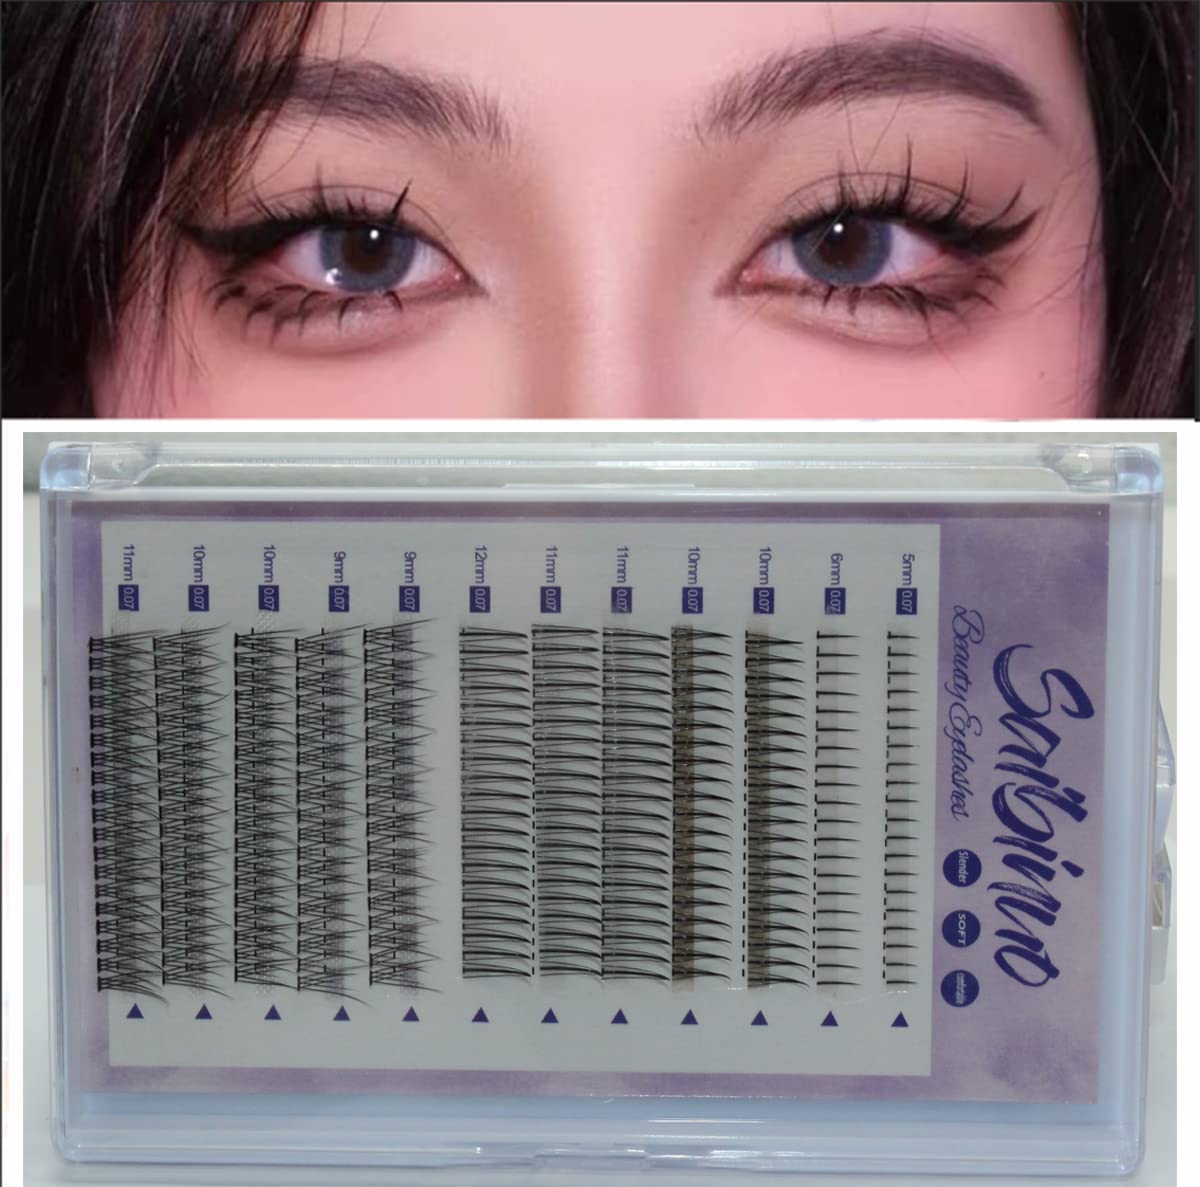 Saibinuo 240pcs Mixed Pack C Curl False Eyelash Extension Individual Lashes Lower Bottom Lash (5-6mm) Fairy Style A Shape (10-12mm) Fish Tail (9-11mm) Natural Clusters, 240 Count (Pack of 1).